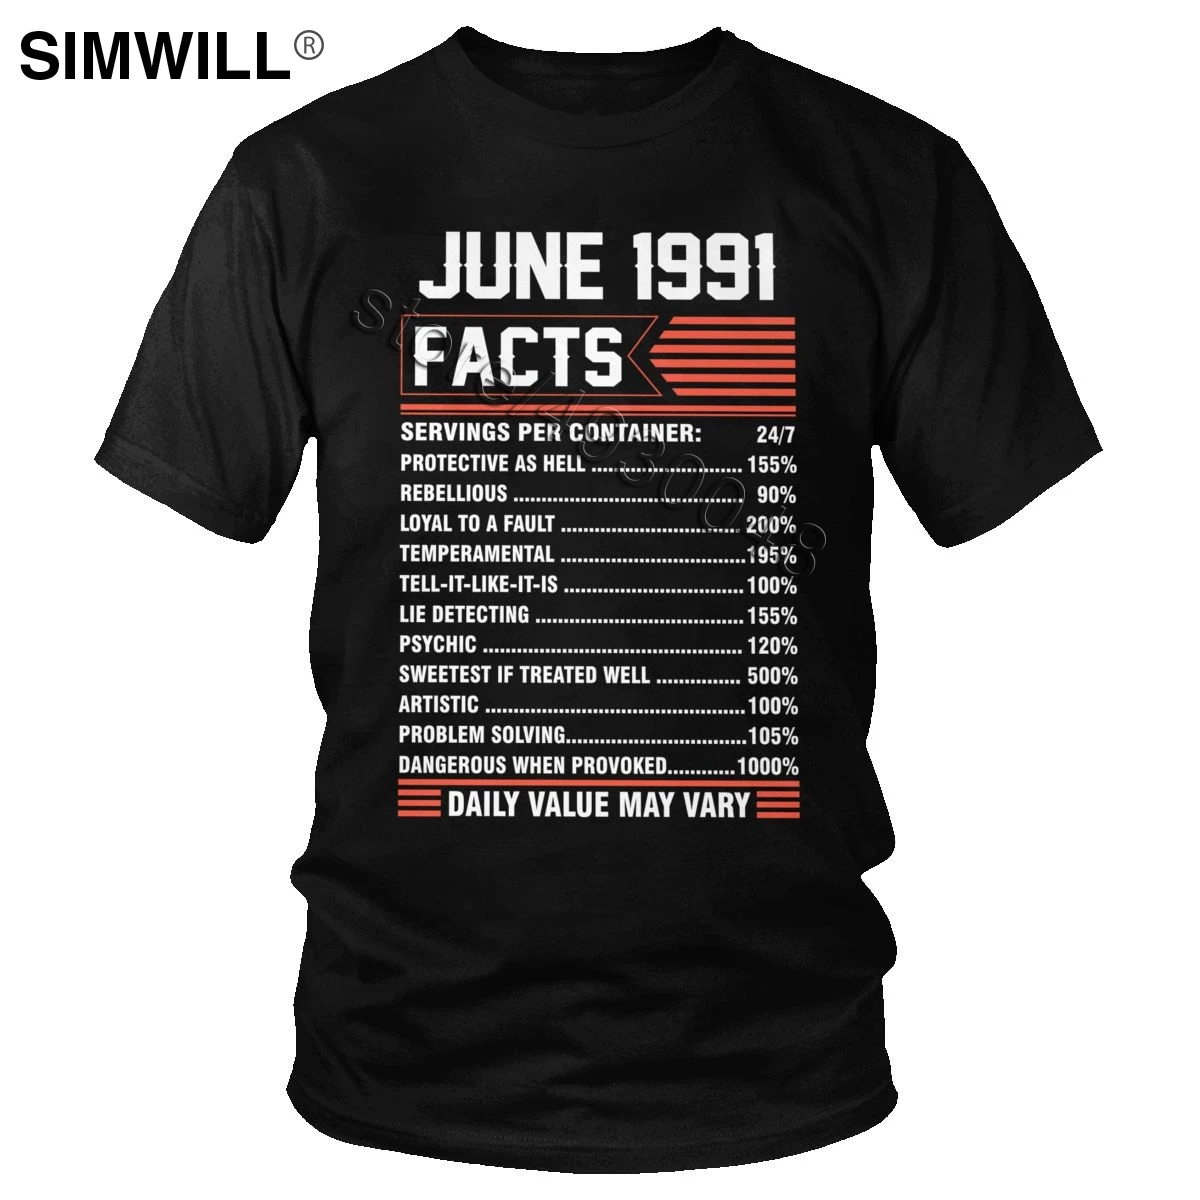 

Trendy Cotton Funny June 1991 Facts T Shirt Short Sleeve Birthday Tee For Men Casual T-Shirts Boyfriend's Gift Merchandise